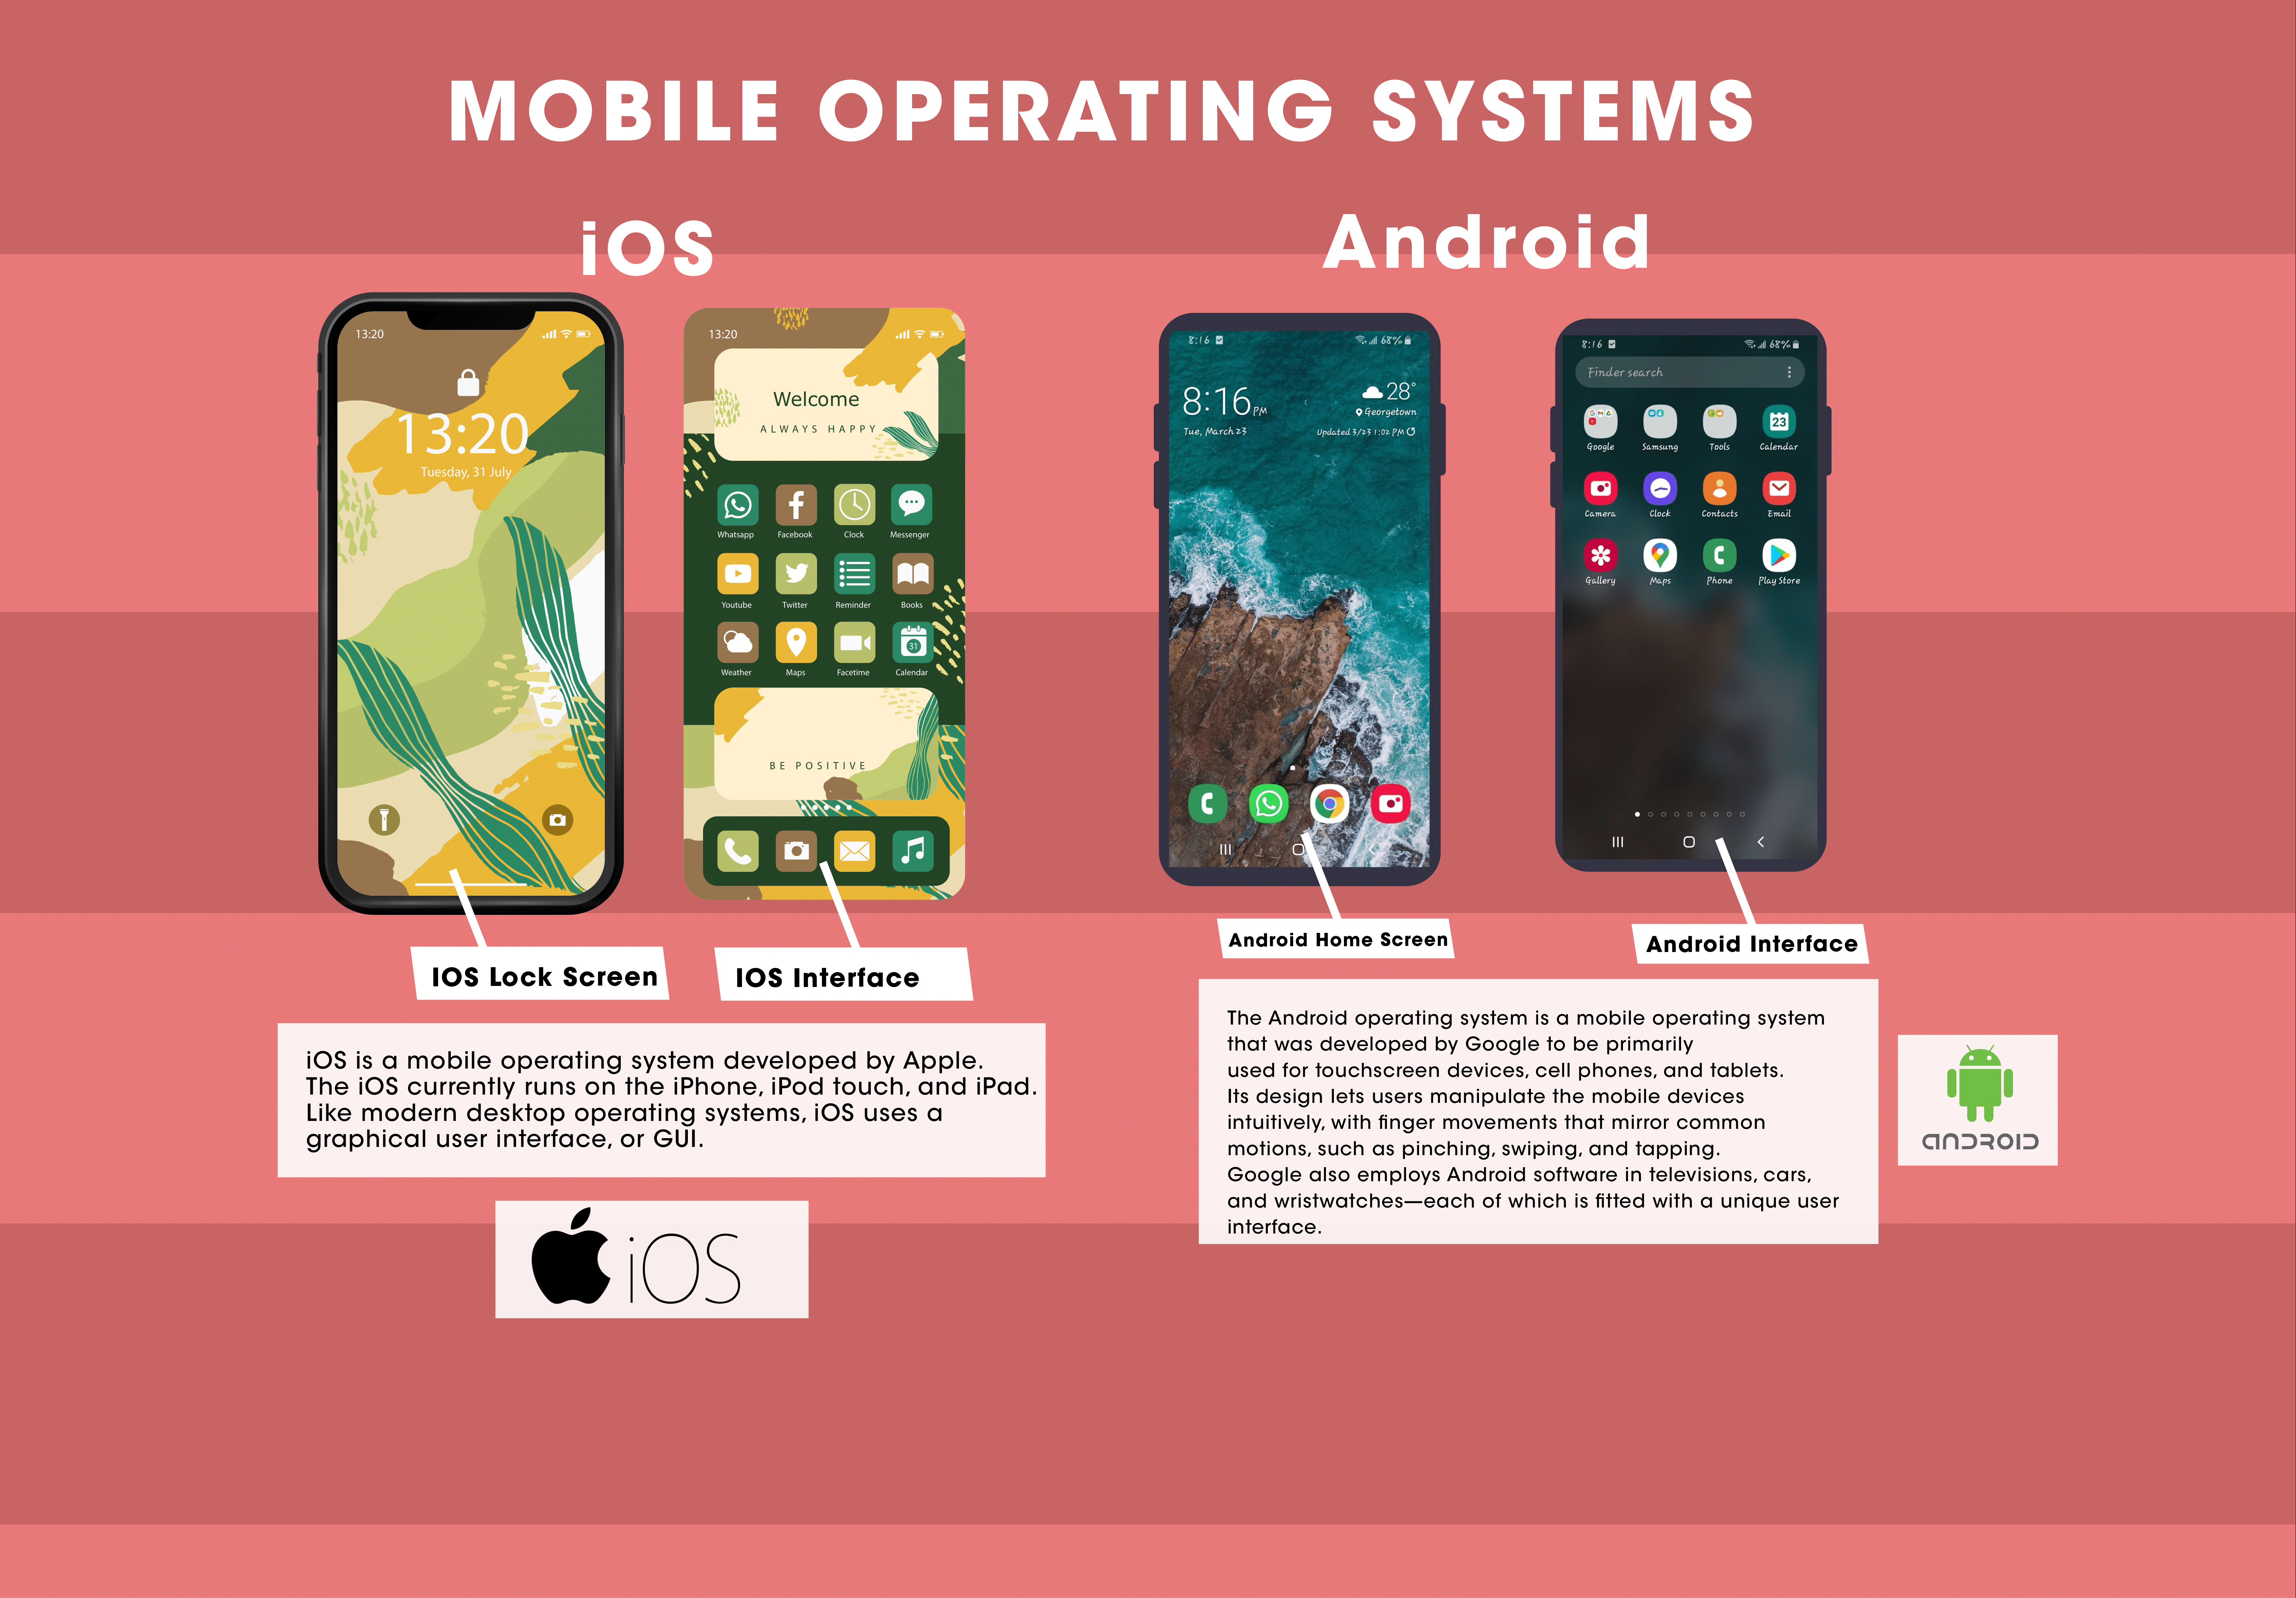 Graphic showing iOS and Android mobile operating systems